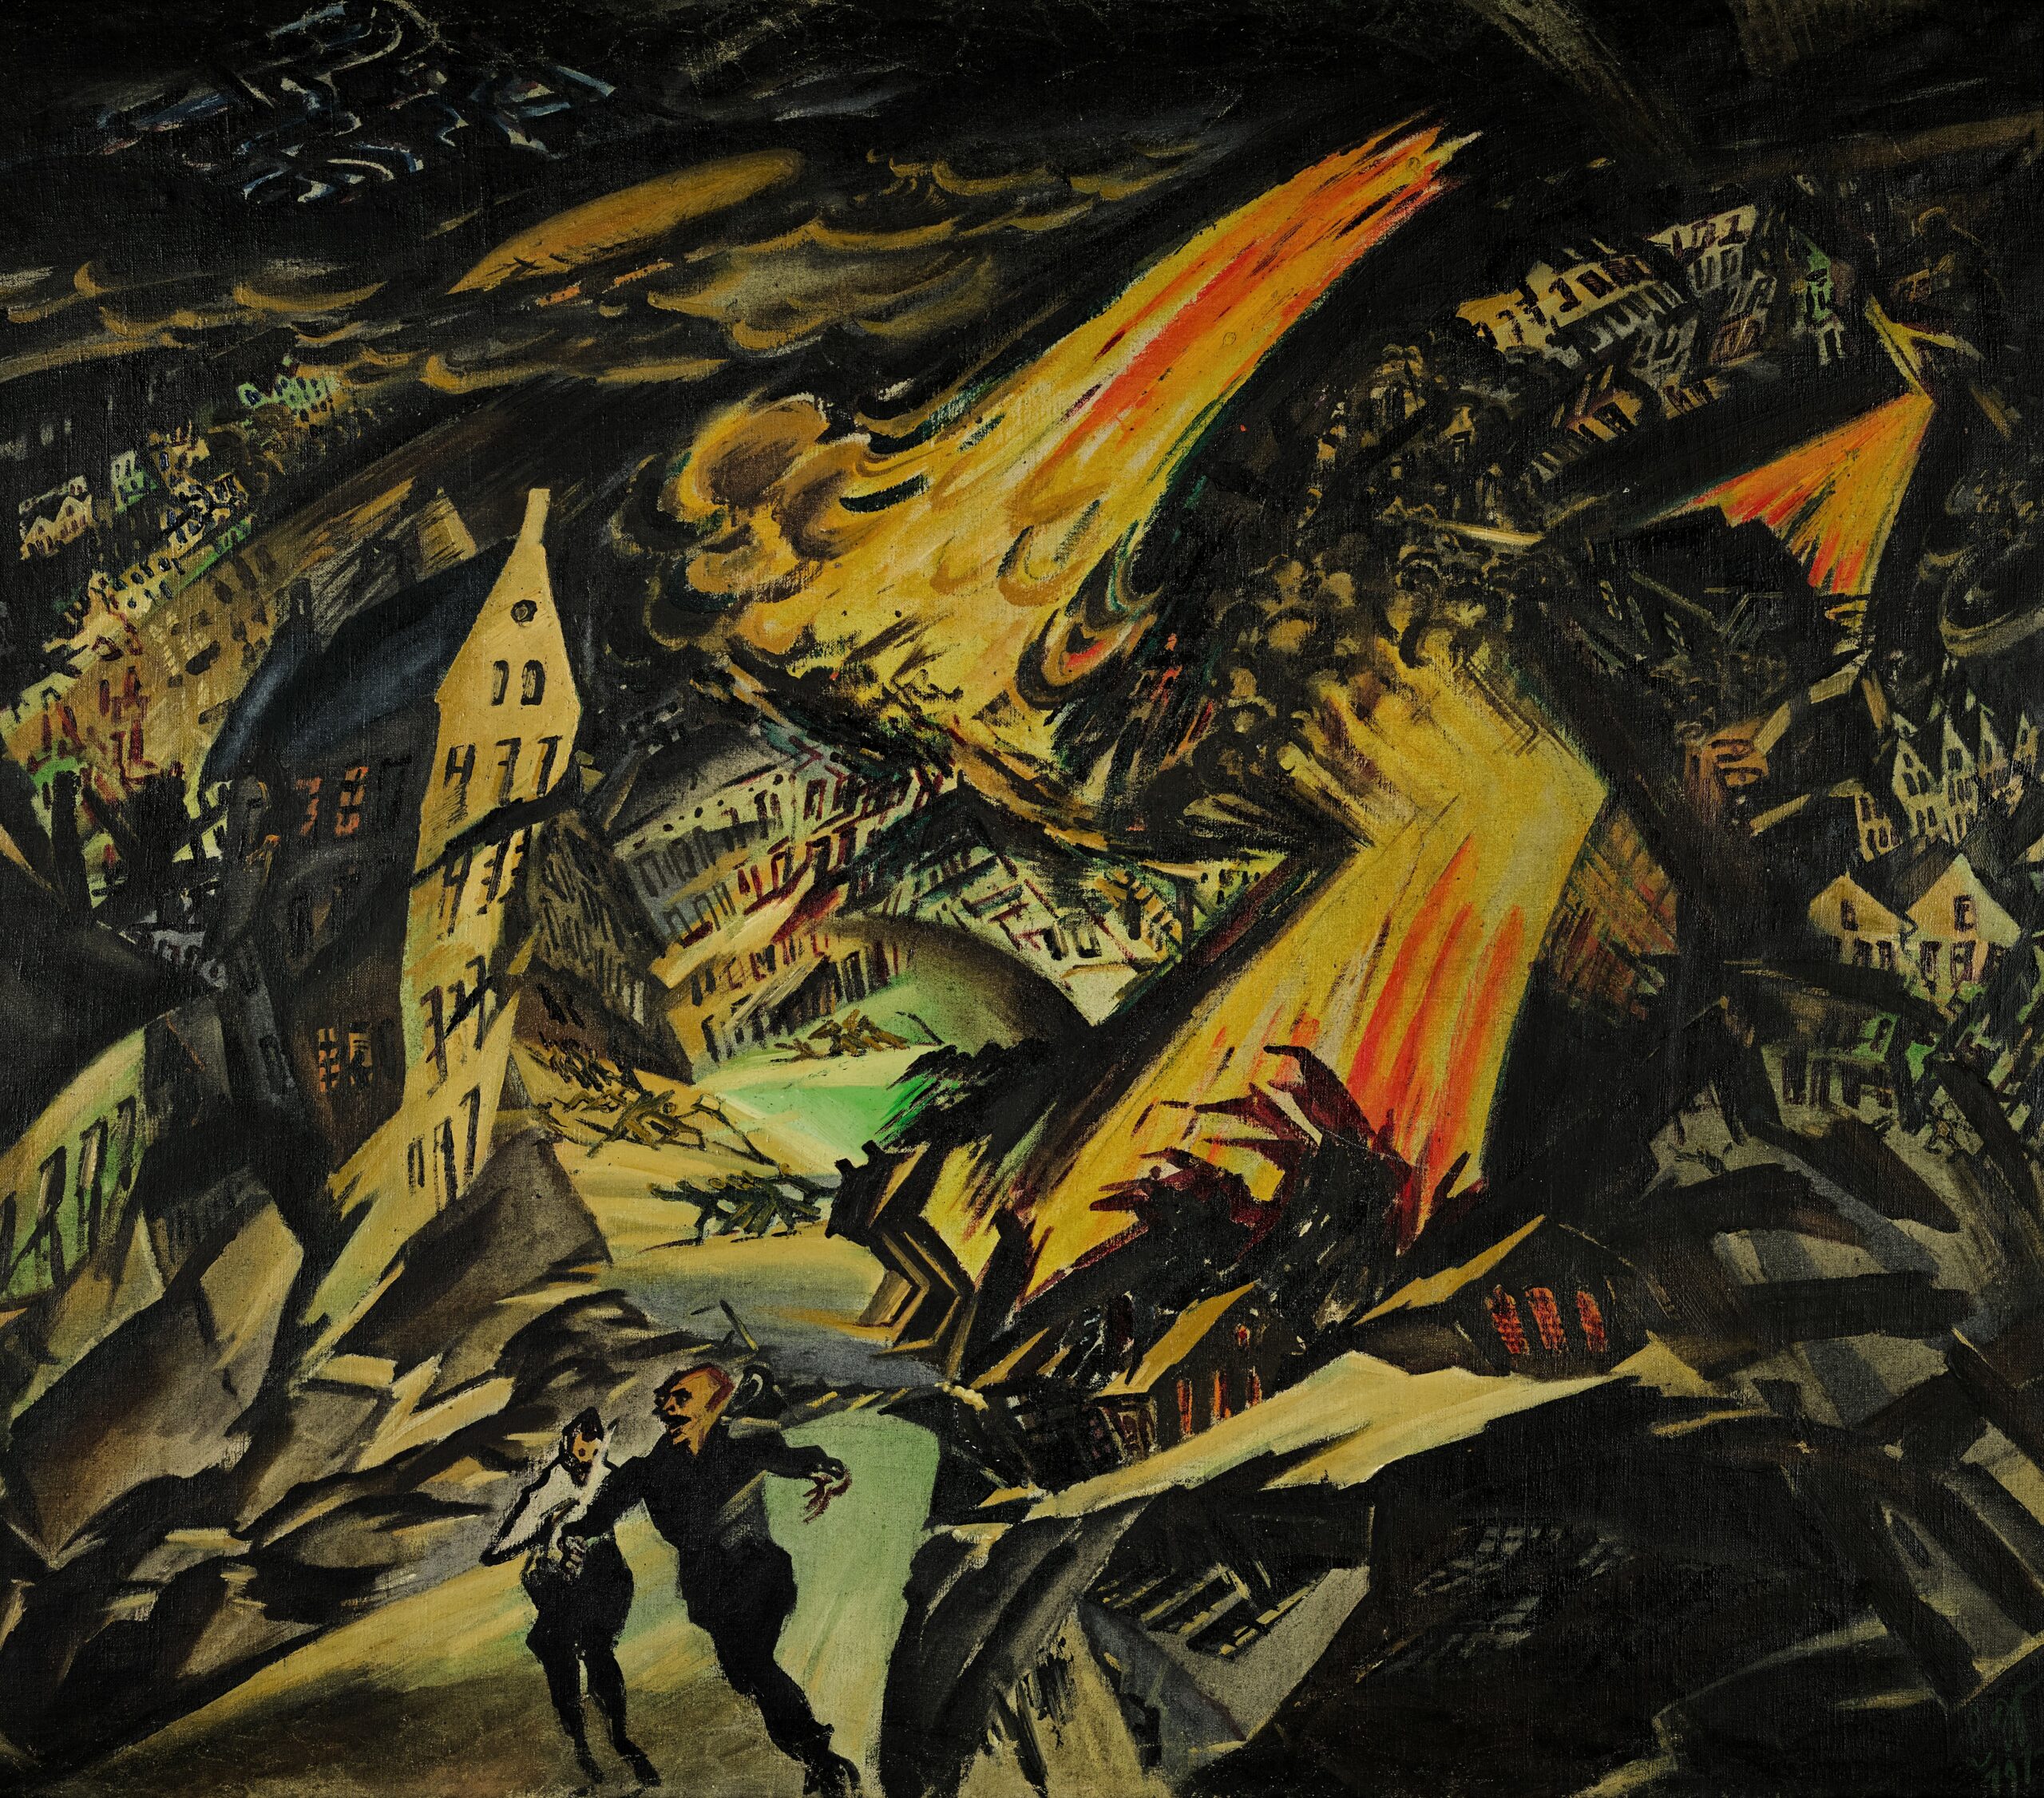 abstract painting with yellow tones and thick, black brushstrokes depicting a city in the throes of war as two figures flee to the foreground in the lower left corner